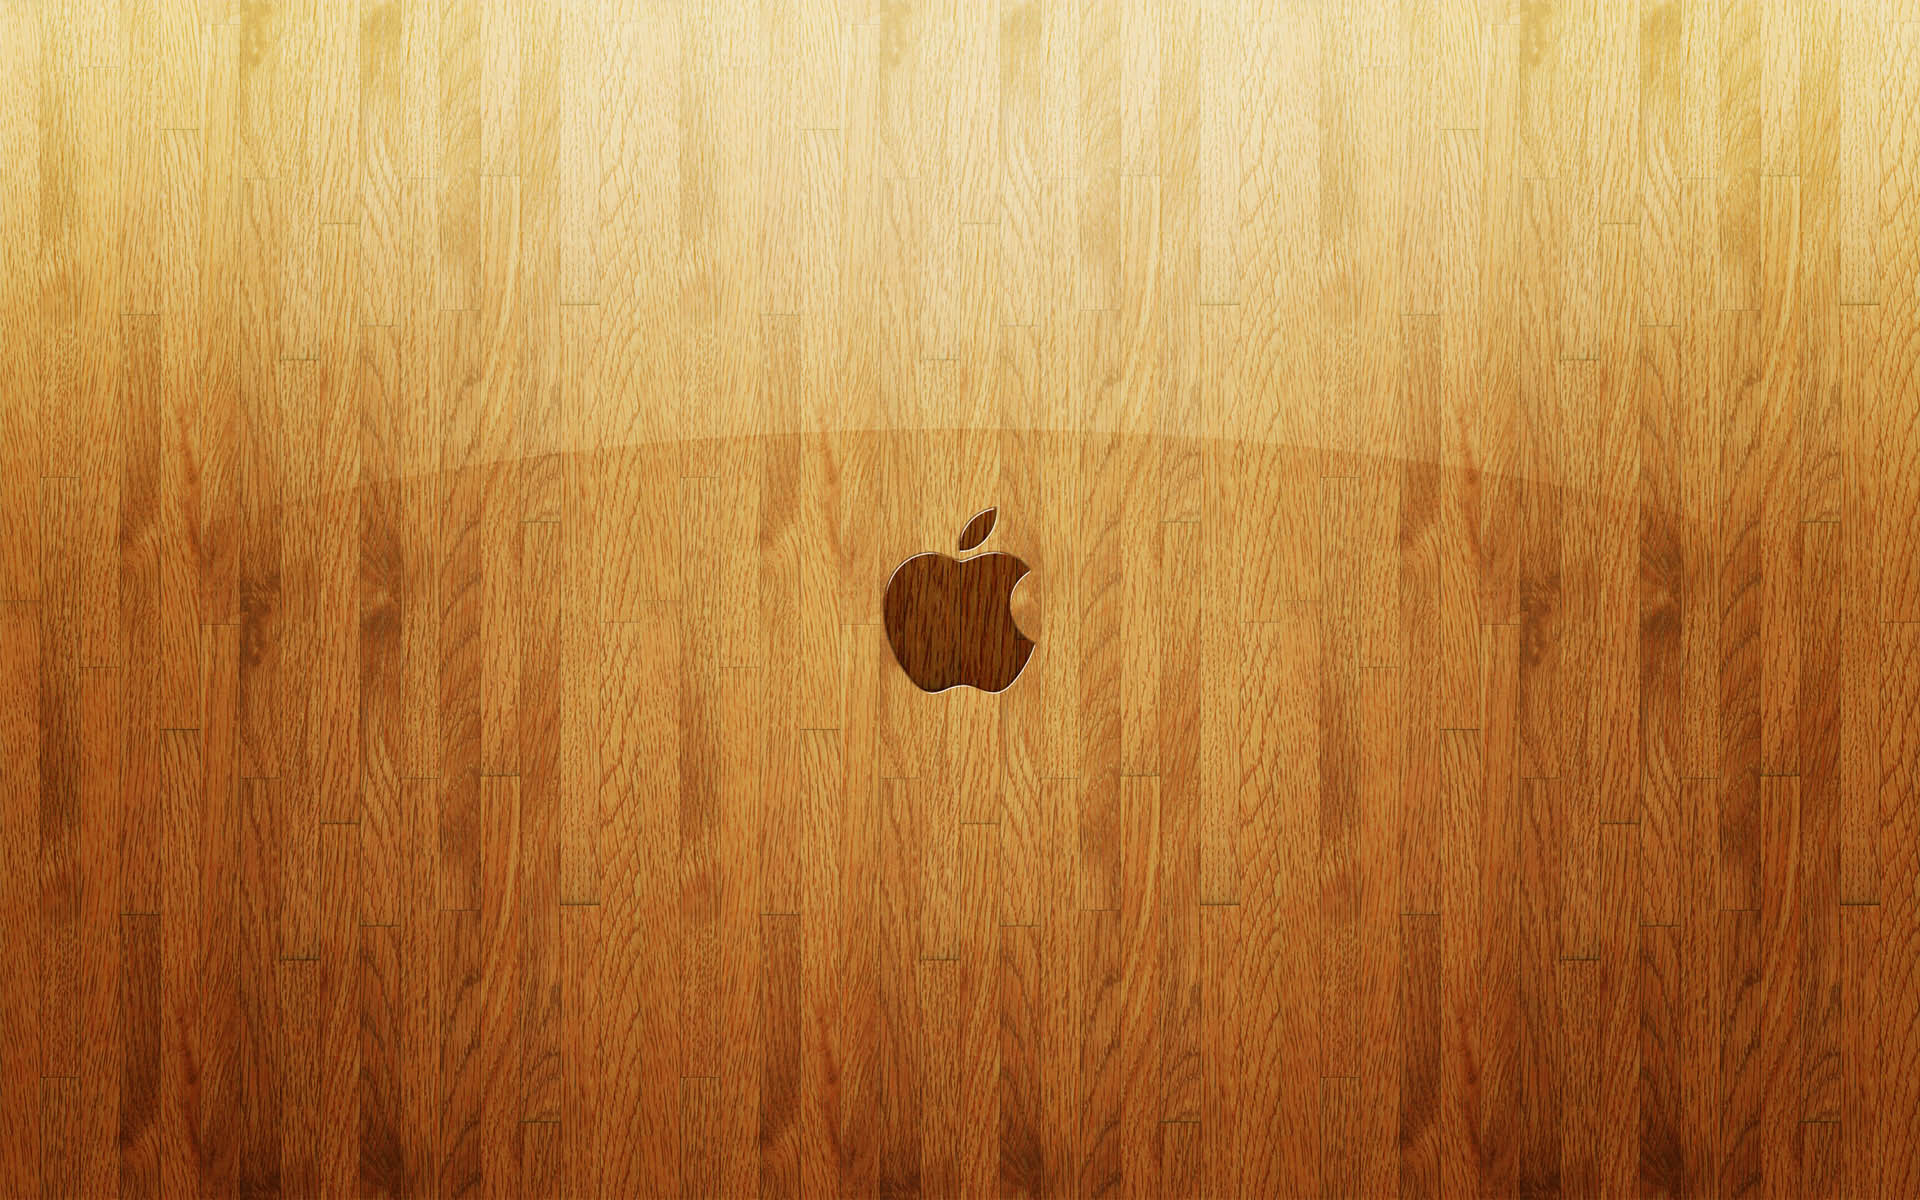 Apple Wooden Glass Wallpapers HD Wallpapers